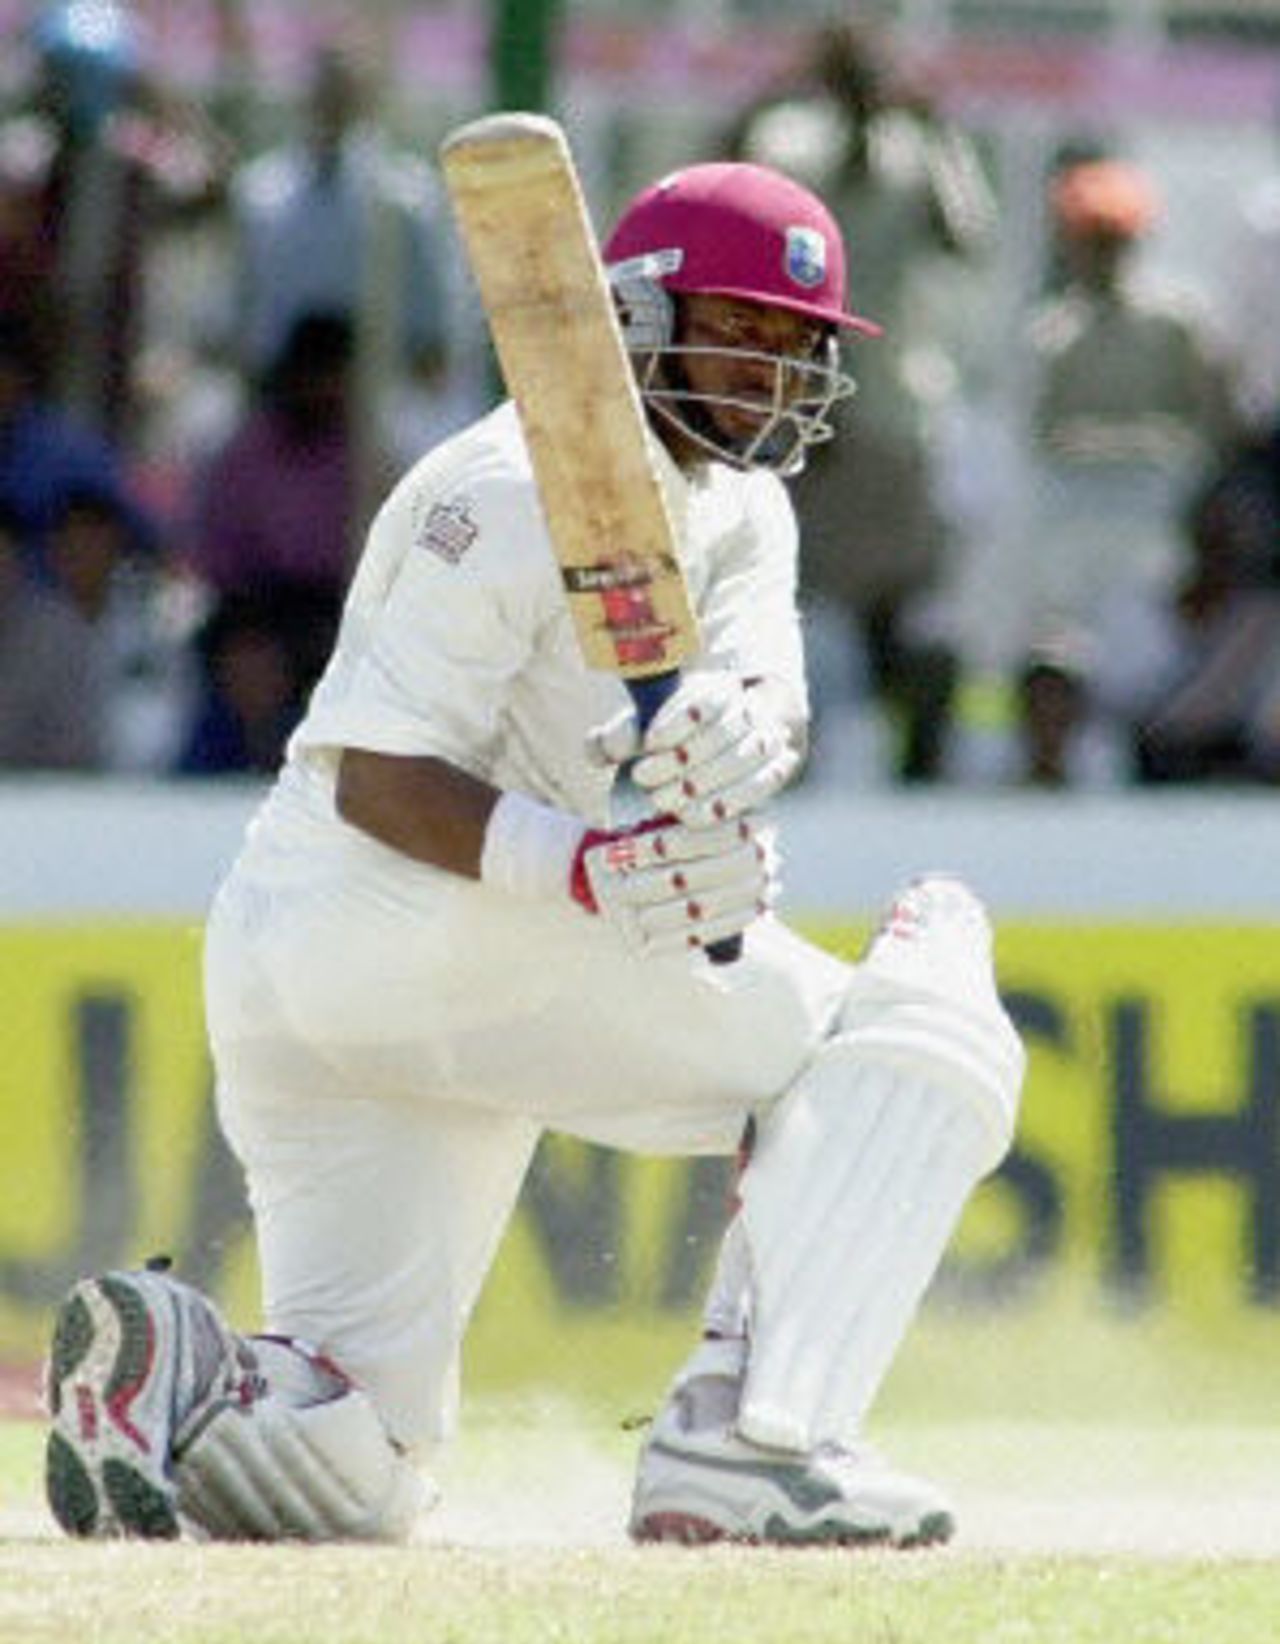 Brian Lara sweeps a ball to the boundary during the final day of the first cricket test match between Sri Lanka and West Indies